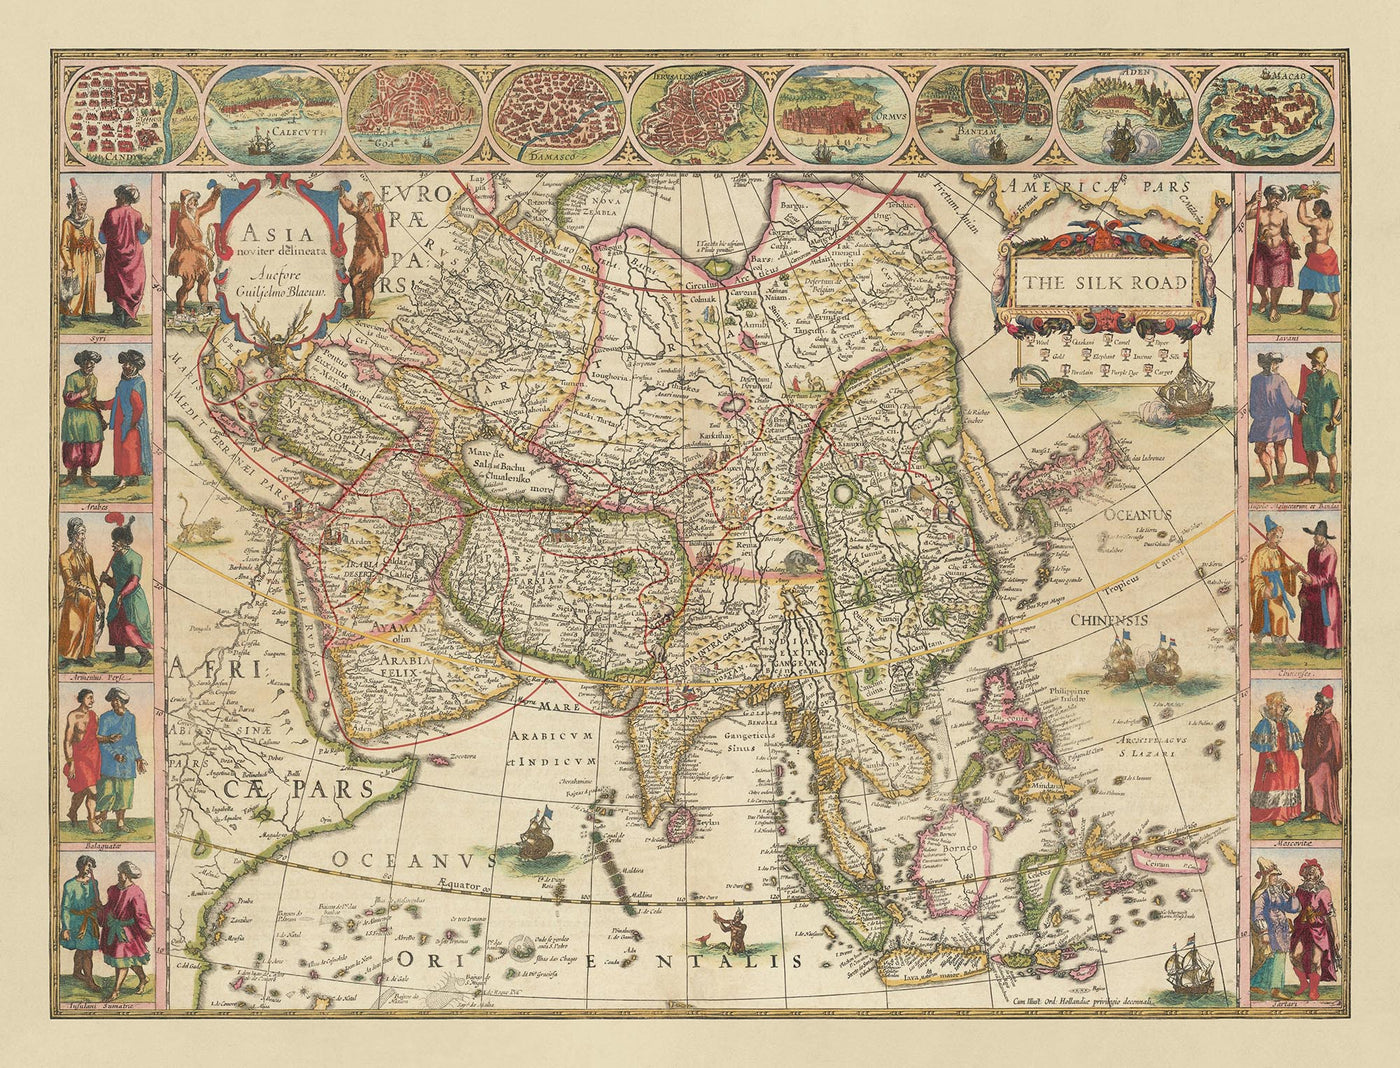 Old Map of The Silk Road, 1640 by Willem Blaeu & The Unique Maps Co.